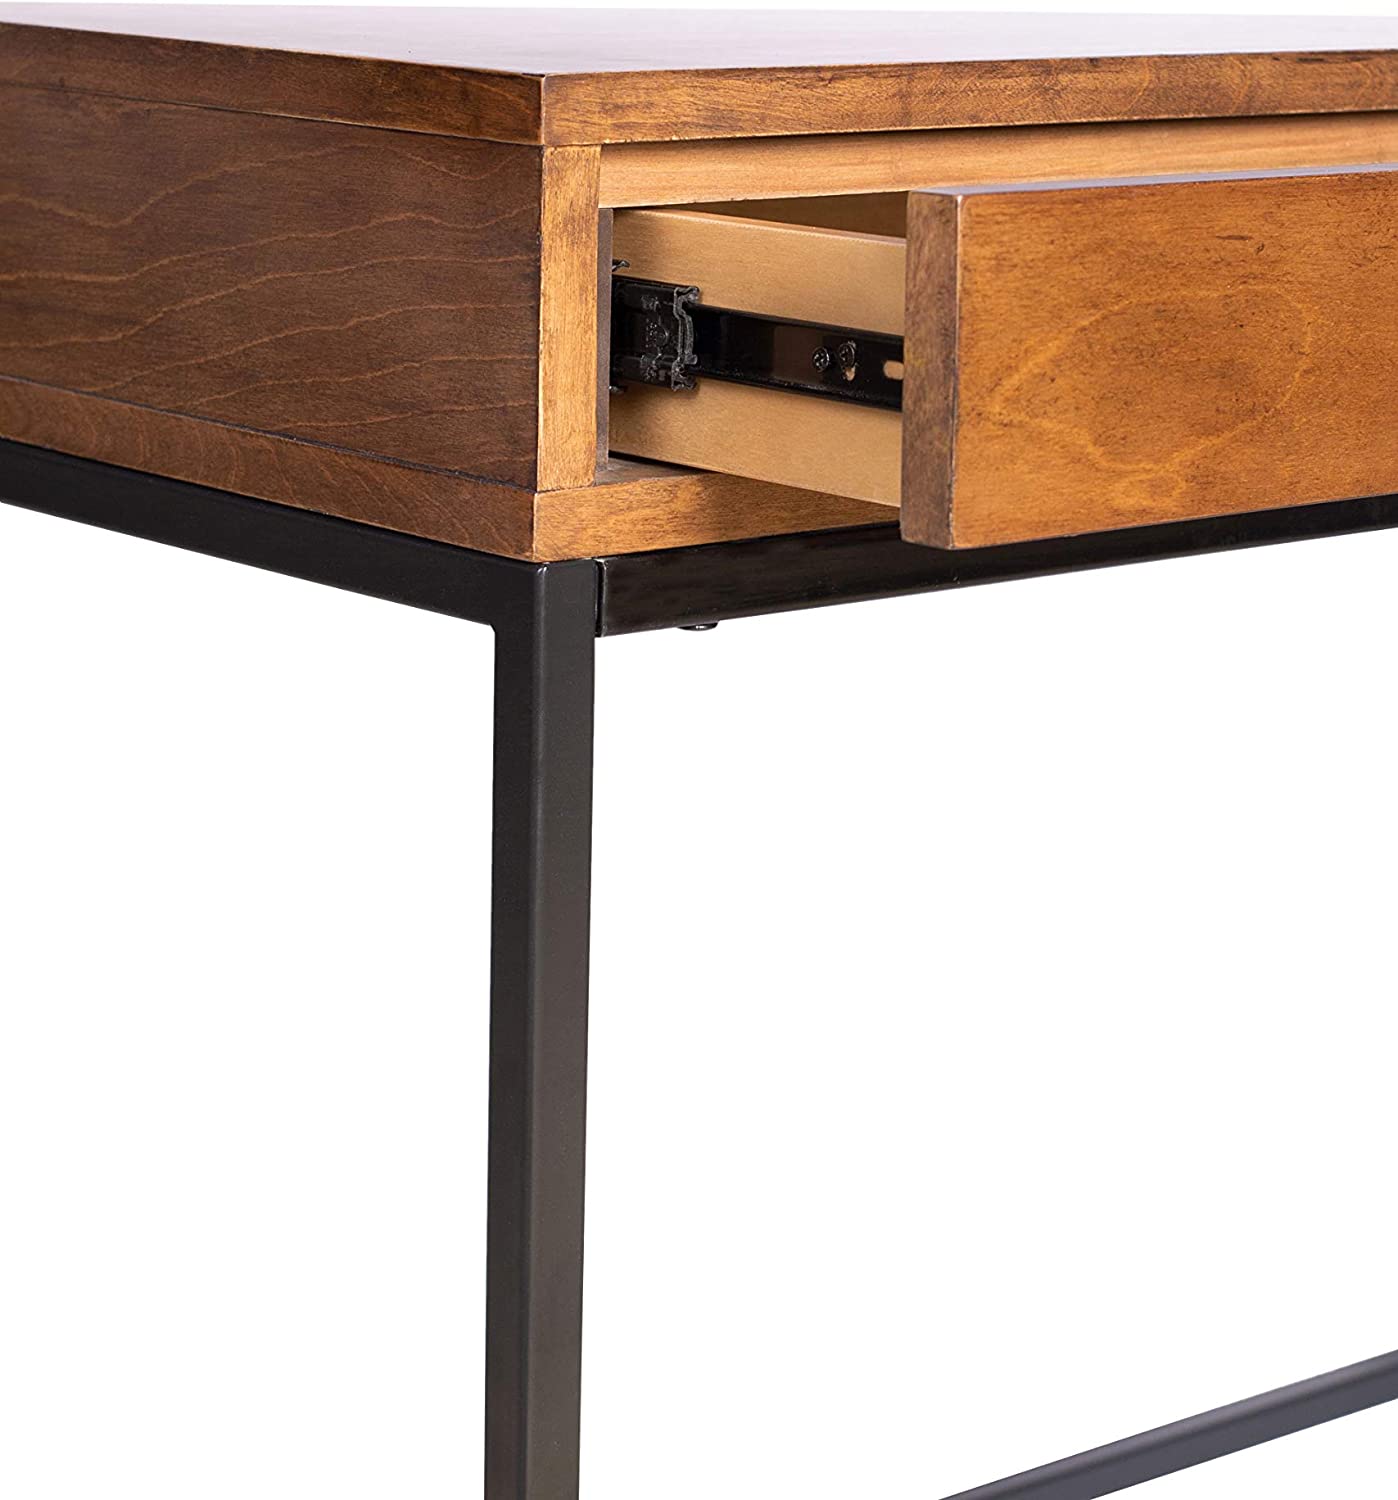 Amazon Brand – Rivet Avery Industrial Home Office Writing Desk with Metal Base, 40"W, Chestnut Brown Finish - $100